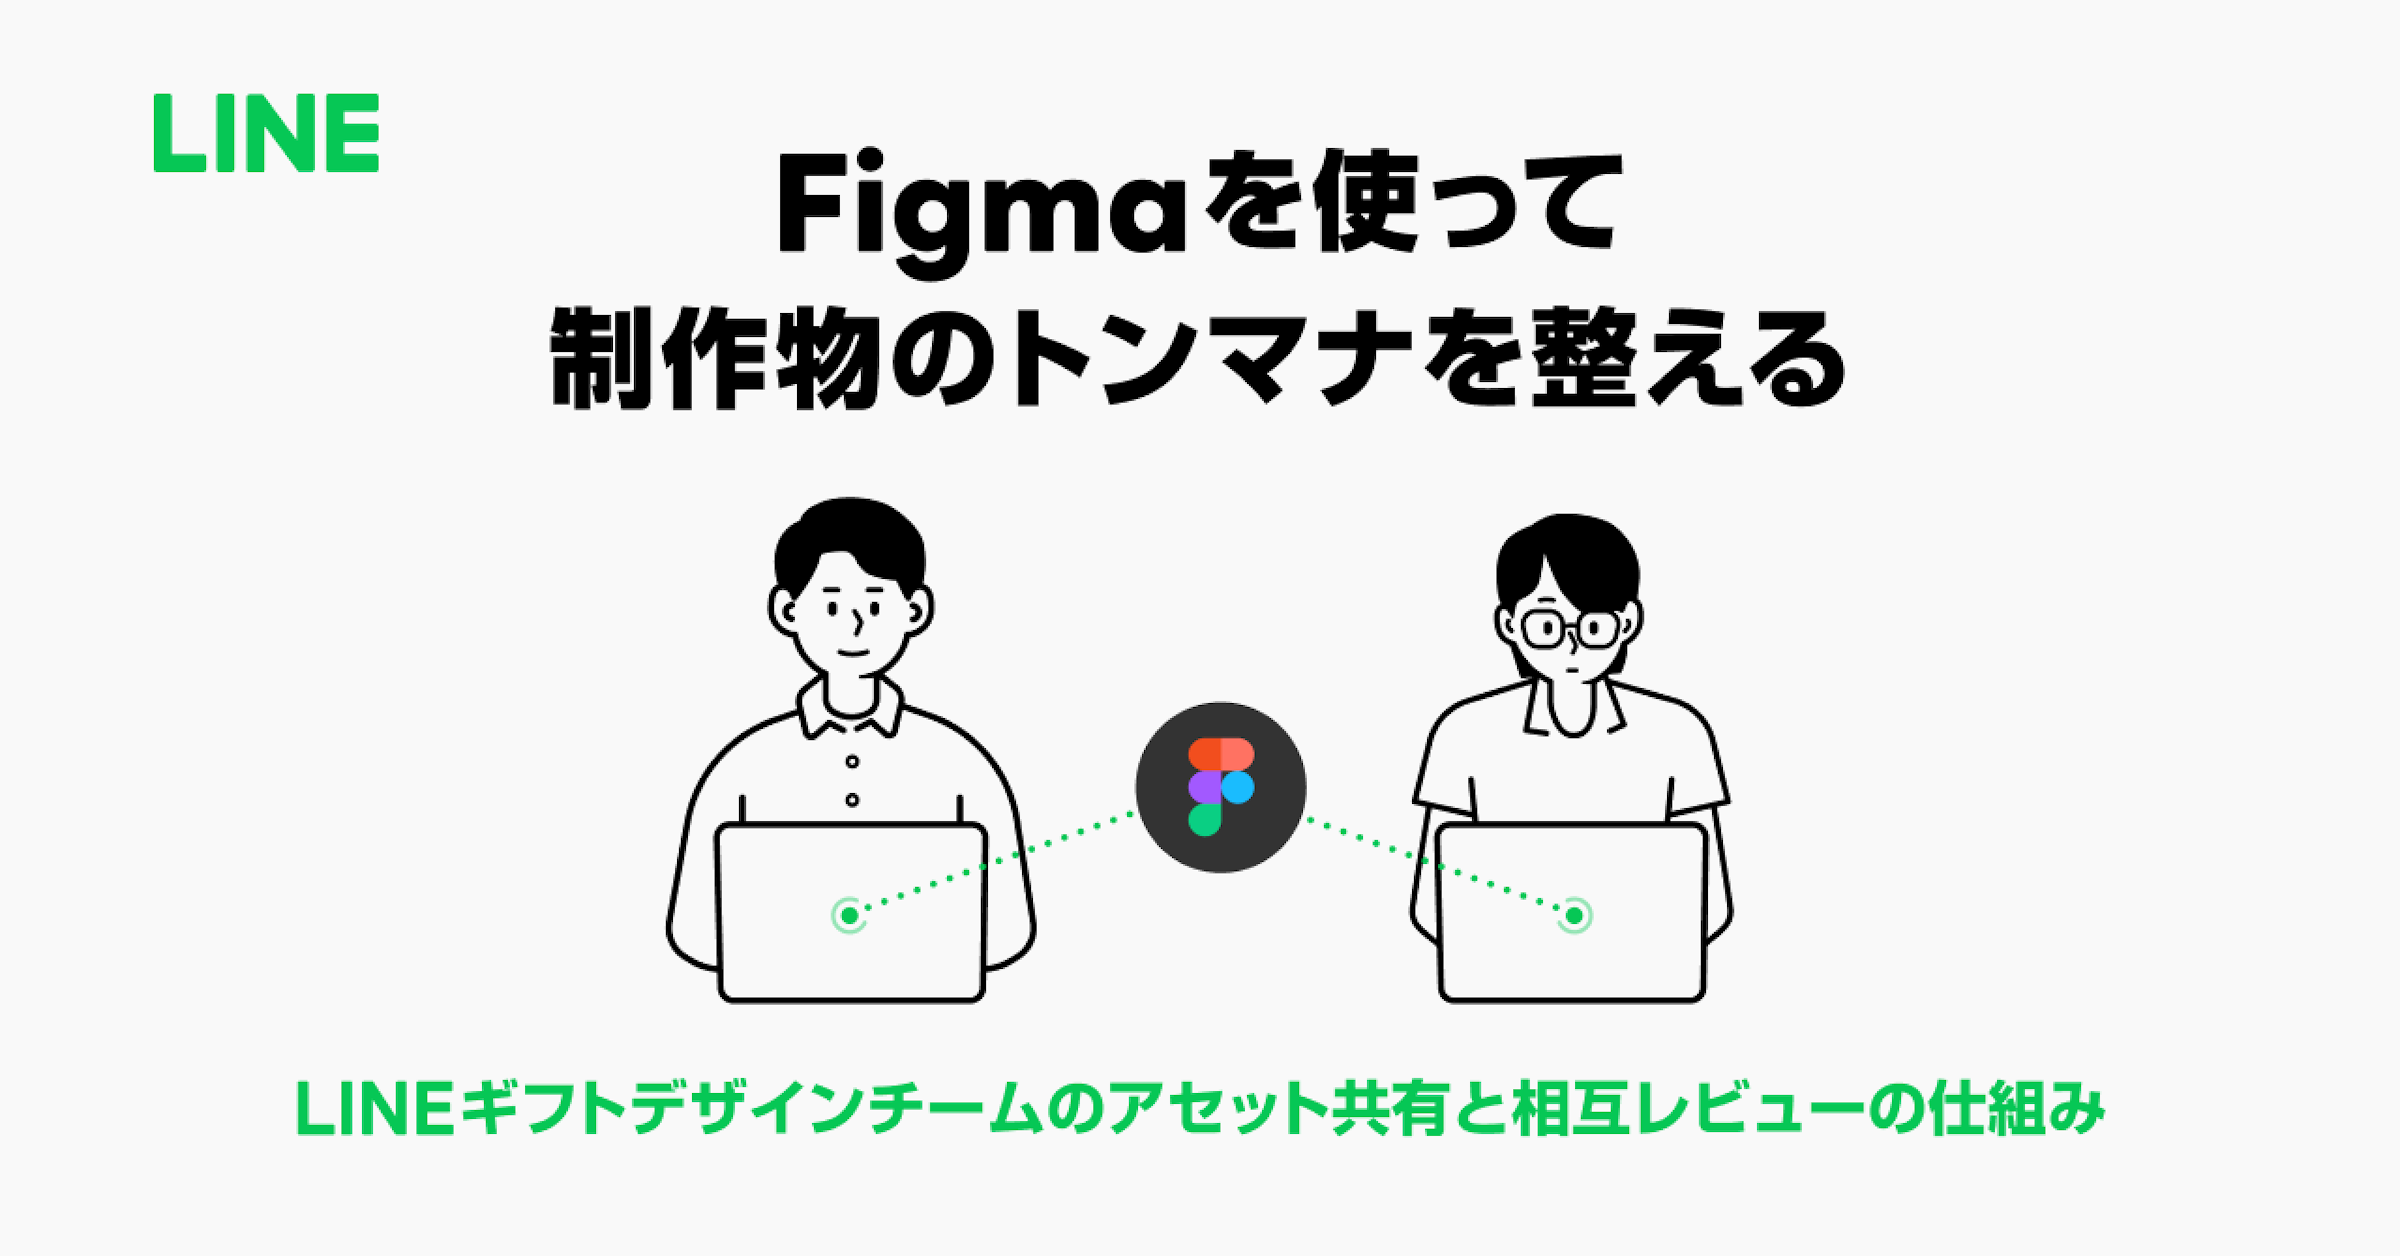 Figmaを使って制作物のトンマナを整える。LINEギフトデザインチームのアセット共有と相互レビューの仕組みのサムネイル画像